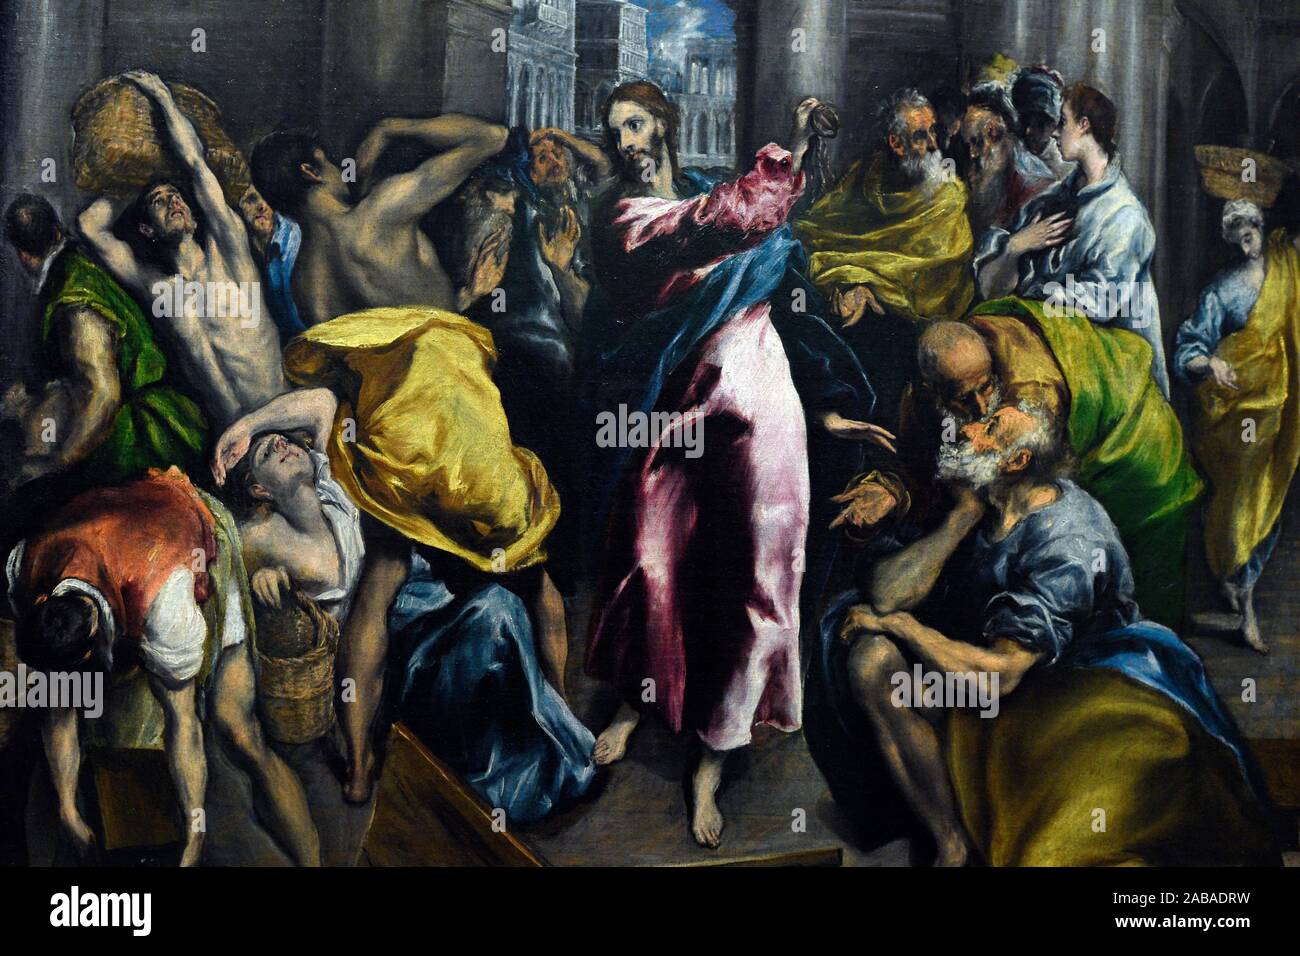 Christ Driving the Money Changers from the temple, oil on canvas, 1600, by the artist El Greco, National Gallery of London. Stock Photo